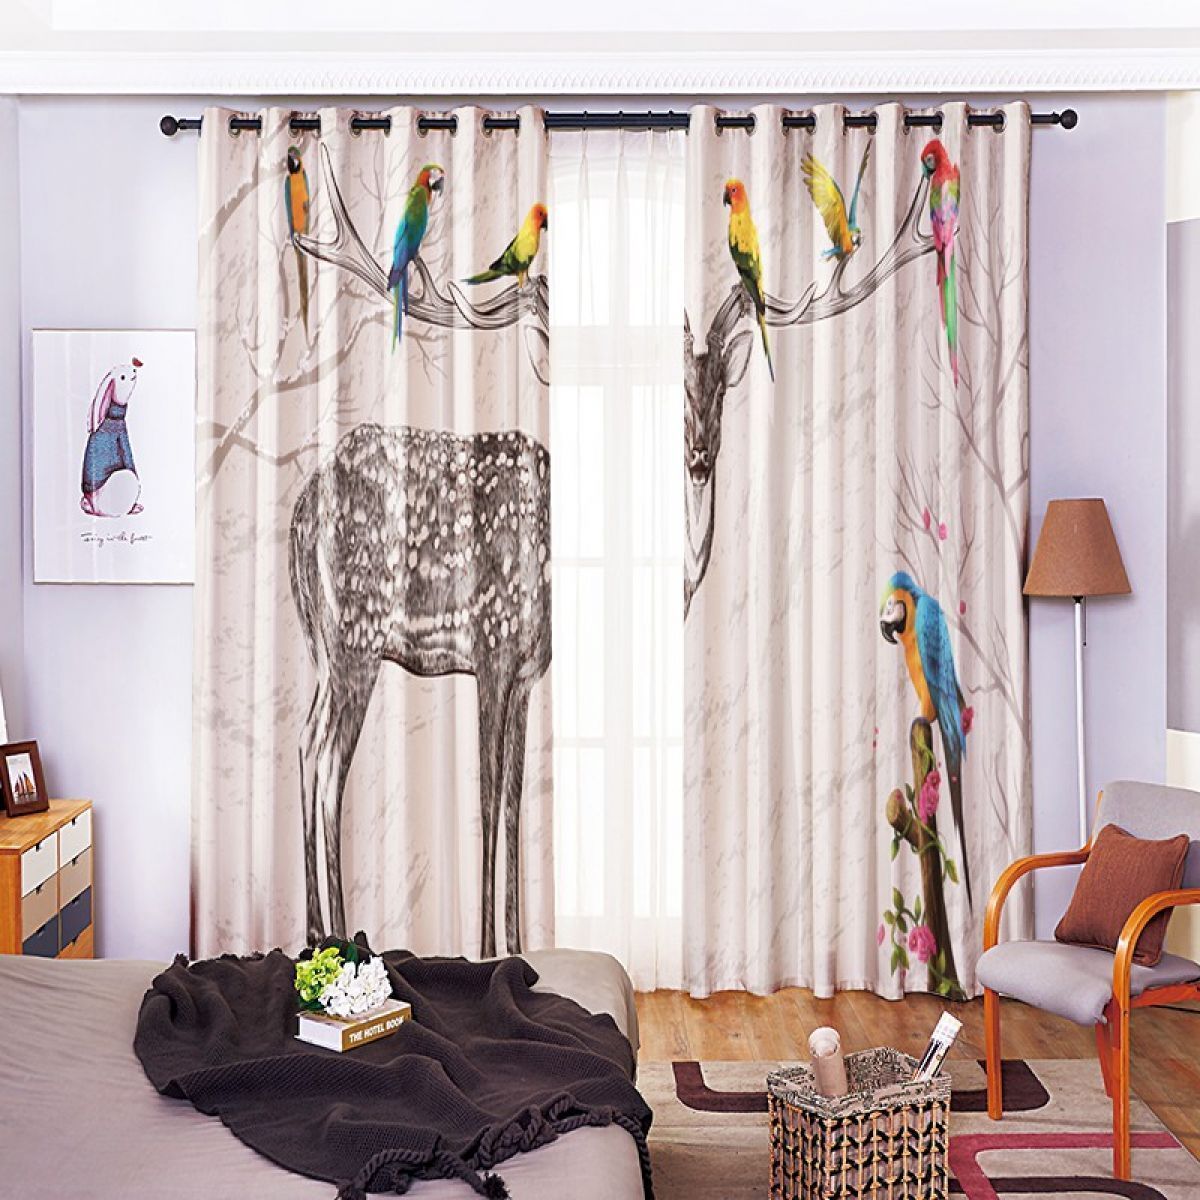 Parrots And Gray Deer Printed Window Curtain Home Decor